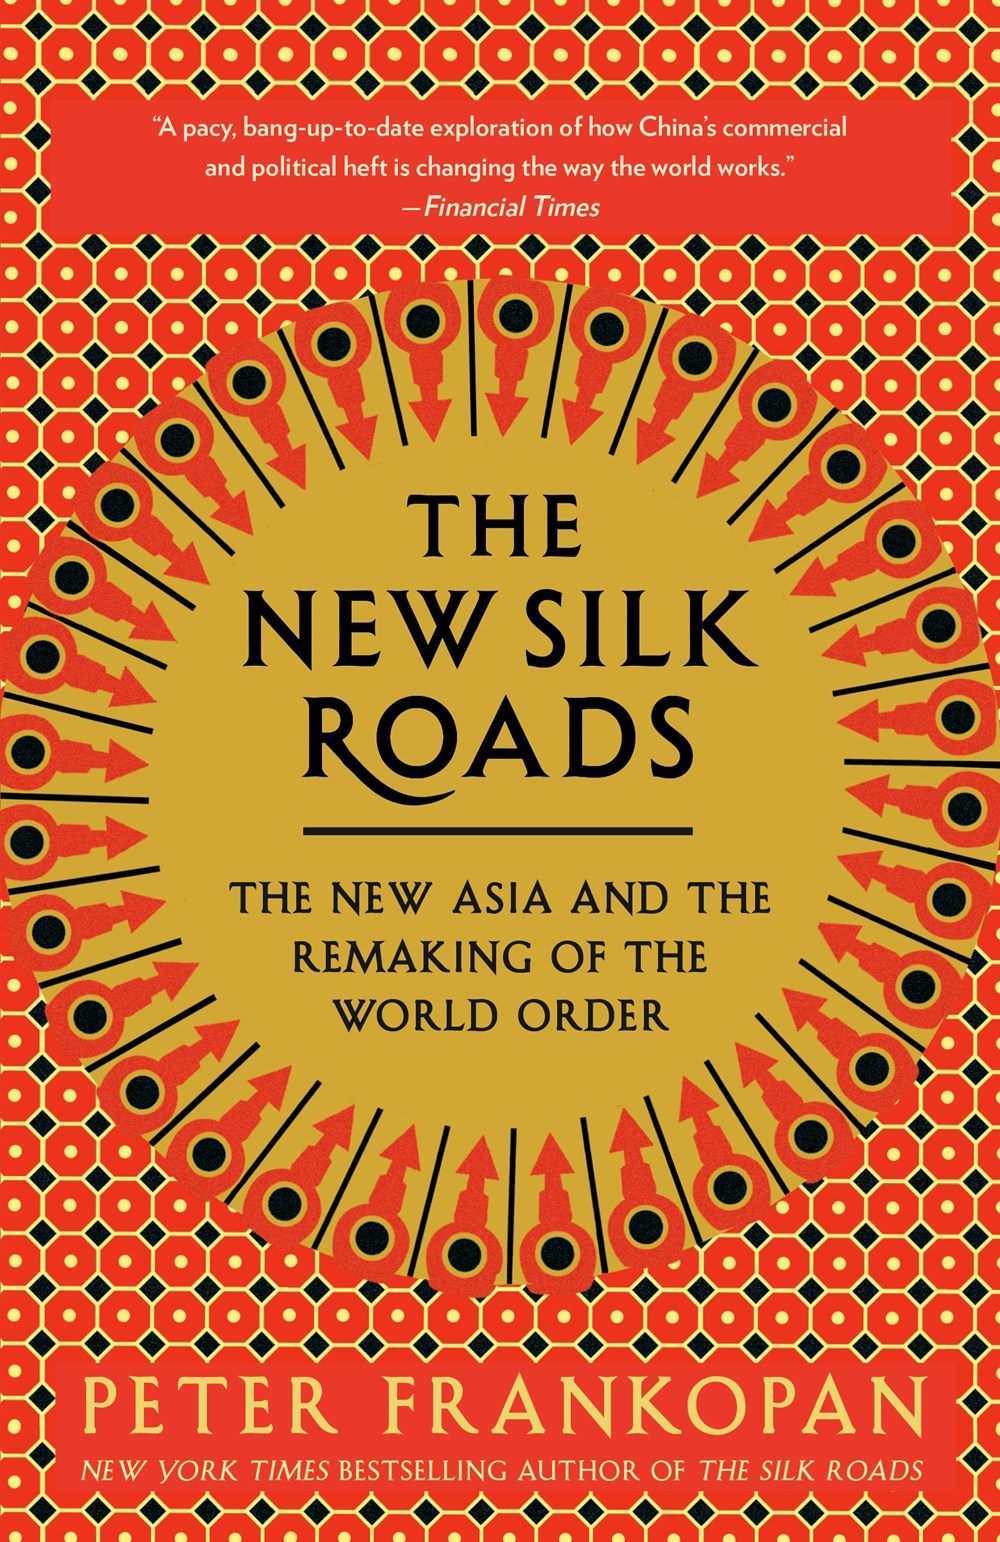 The New Silk Road: The New Asia and the Remaking of the World Order by Peter Frankopan